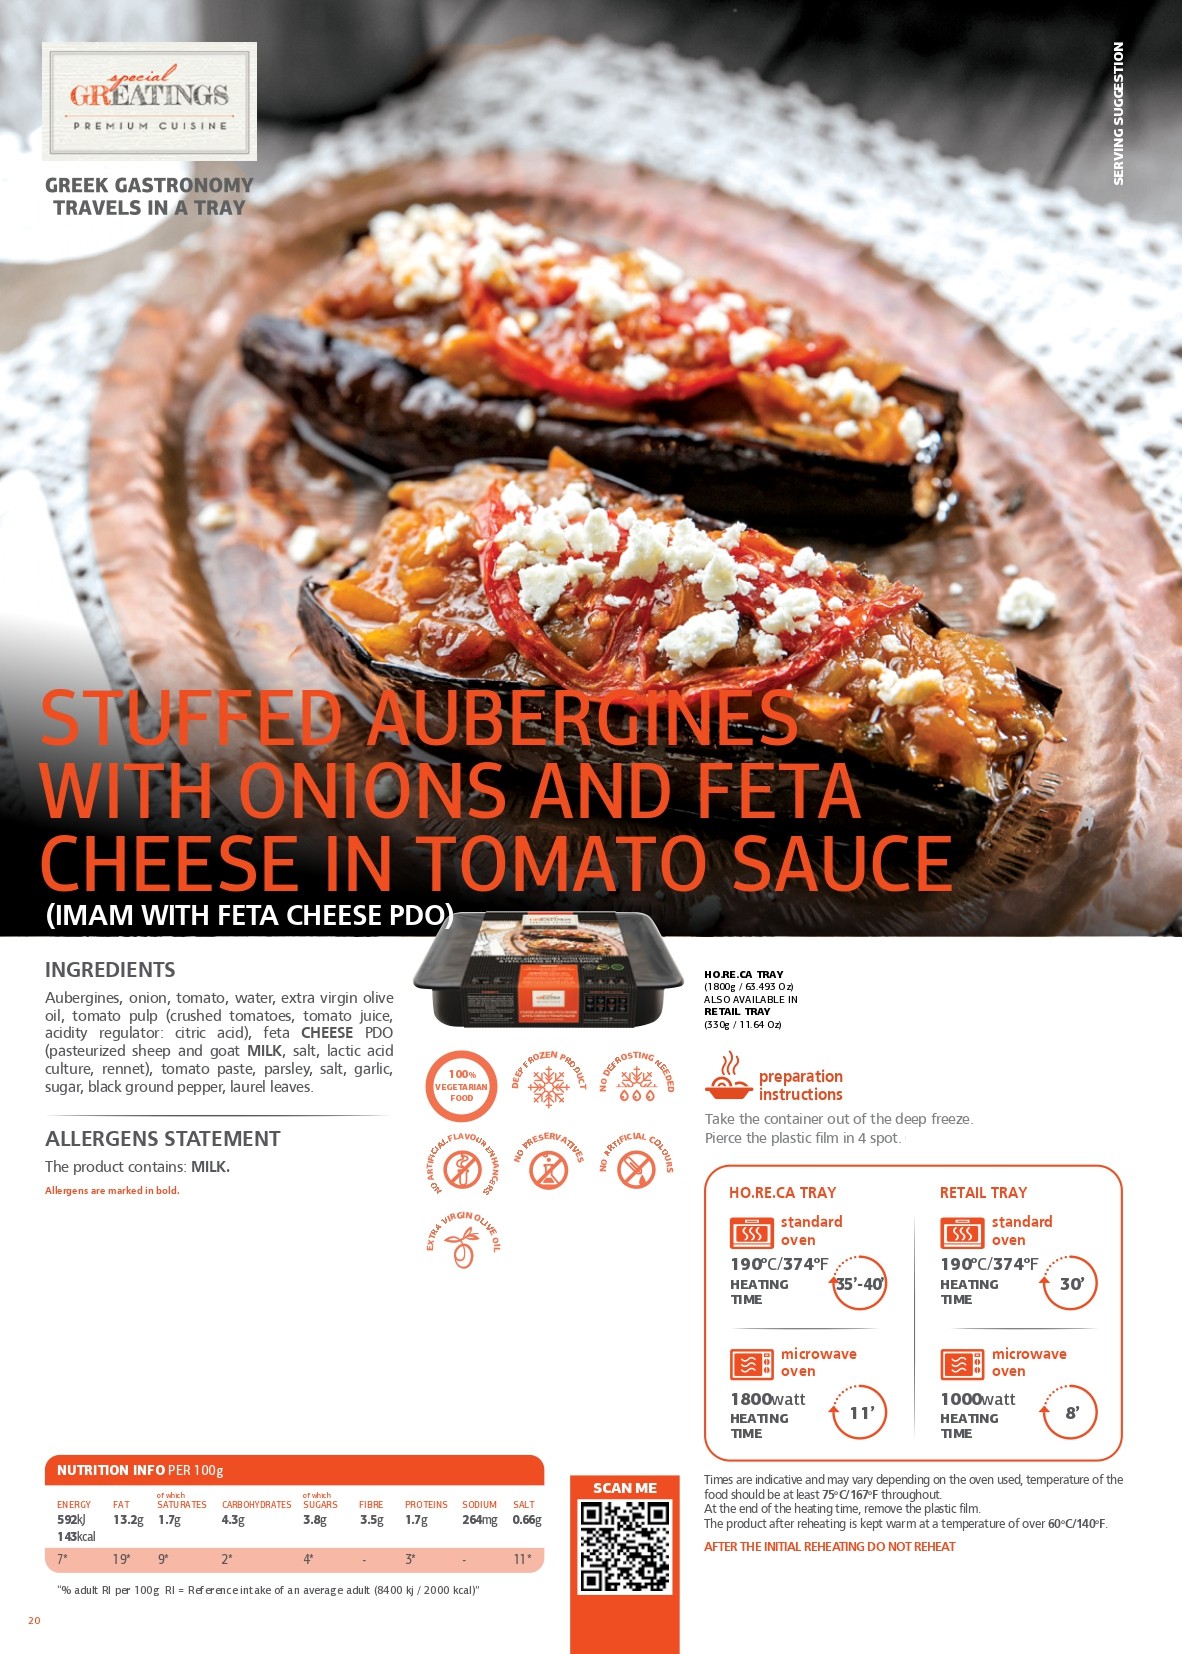 Stuffed aubergines with onions and feta cheese PDO in tomato sauce pdf image